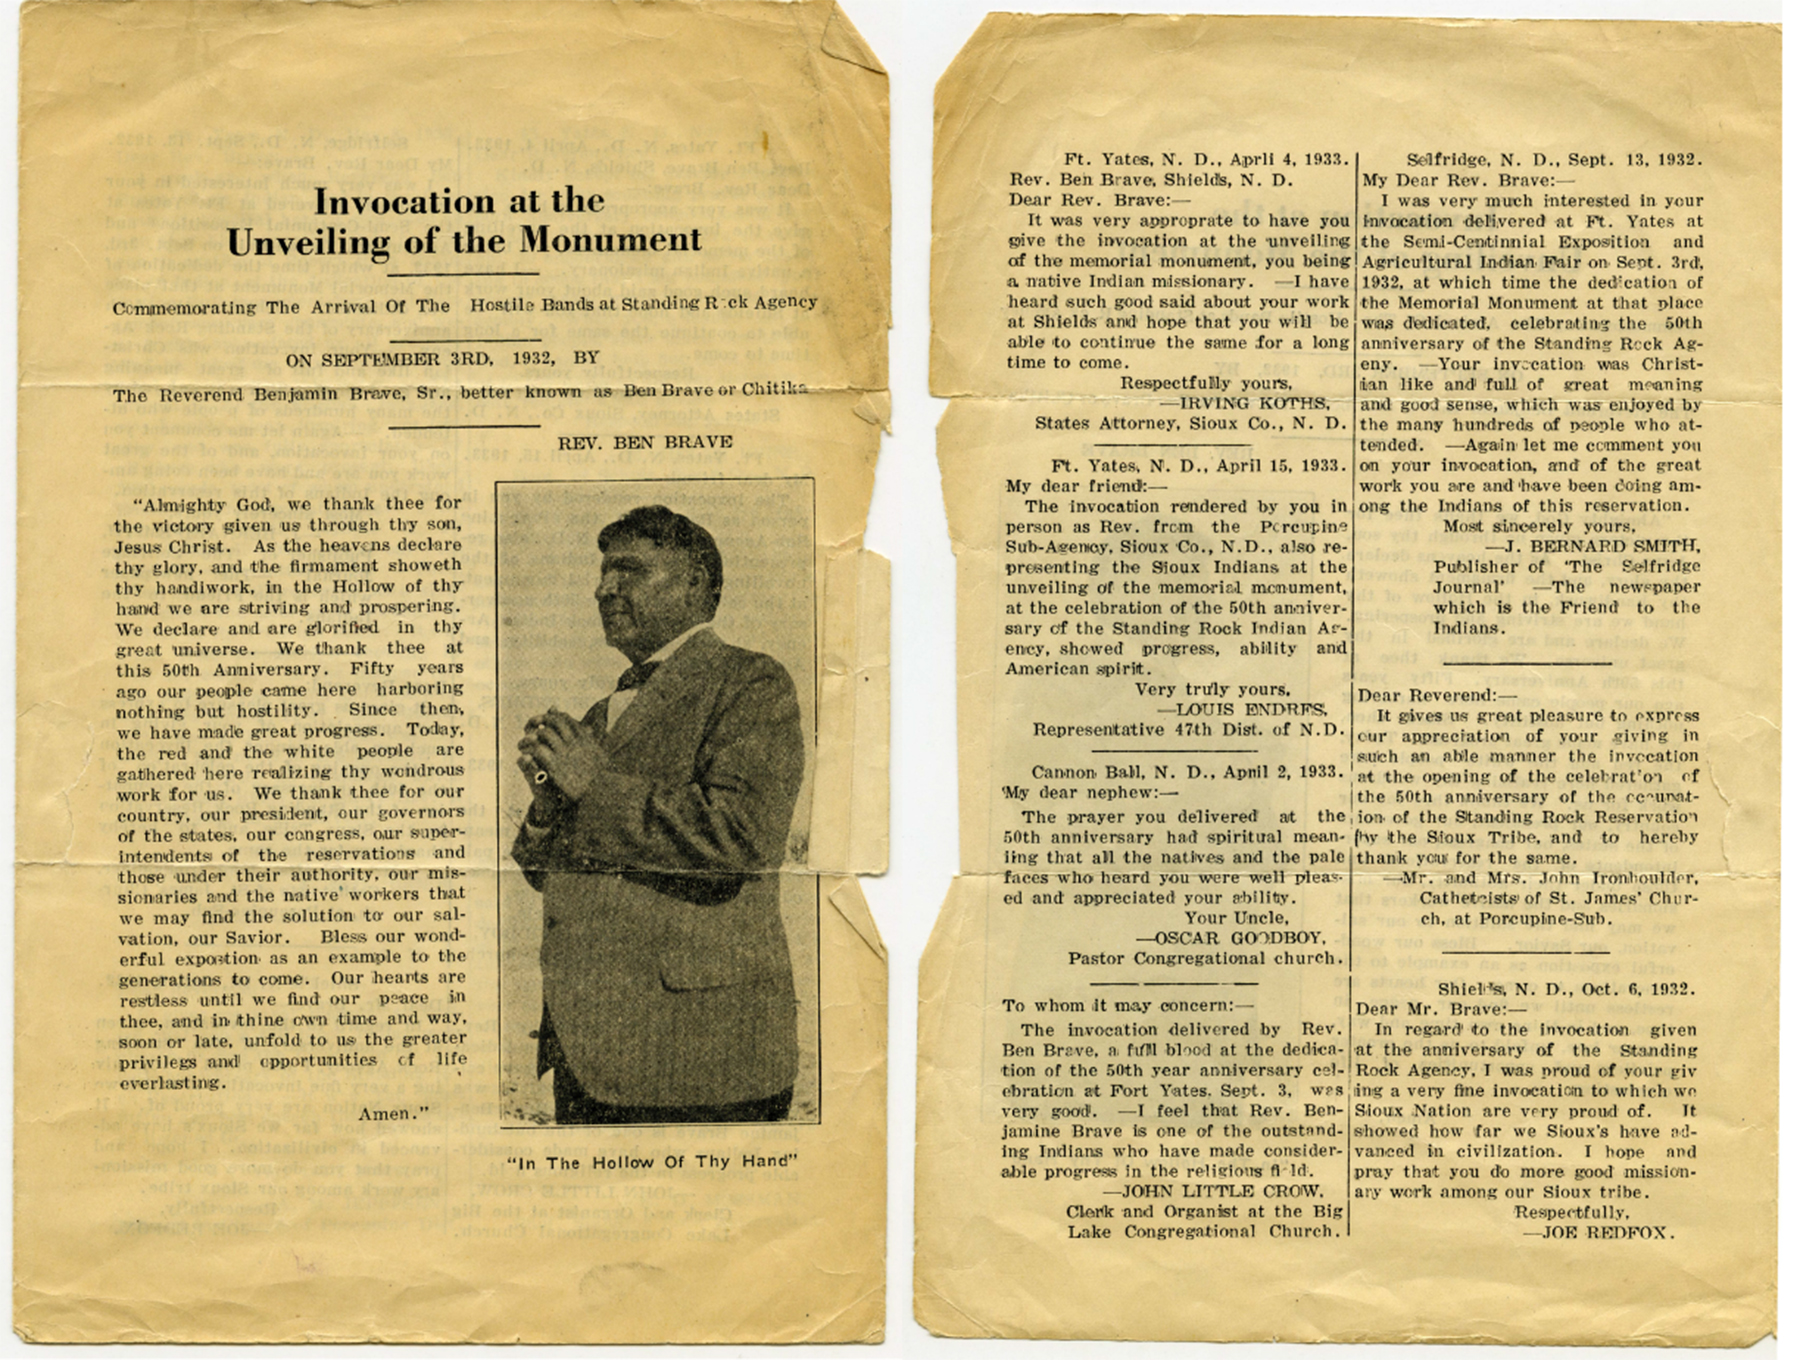 Pamphlet with Ben Brave’s invocation “commemorating the arrival of the hostile bands at Standing Rock Agency,” September 3, 1932. Pearl: 60352. All photos courtesy of the Presbyterian Historical Society. 